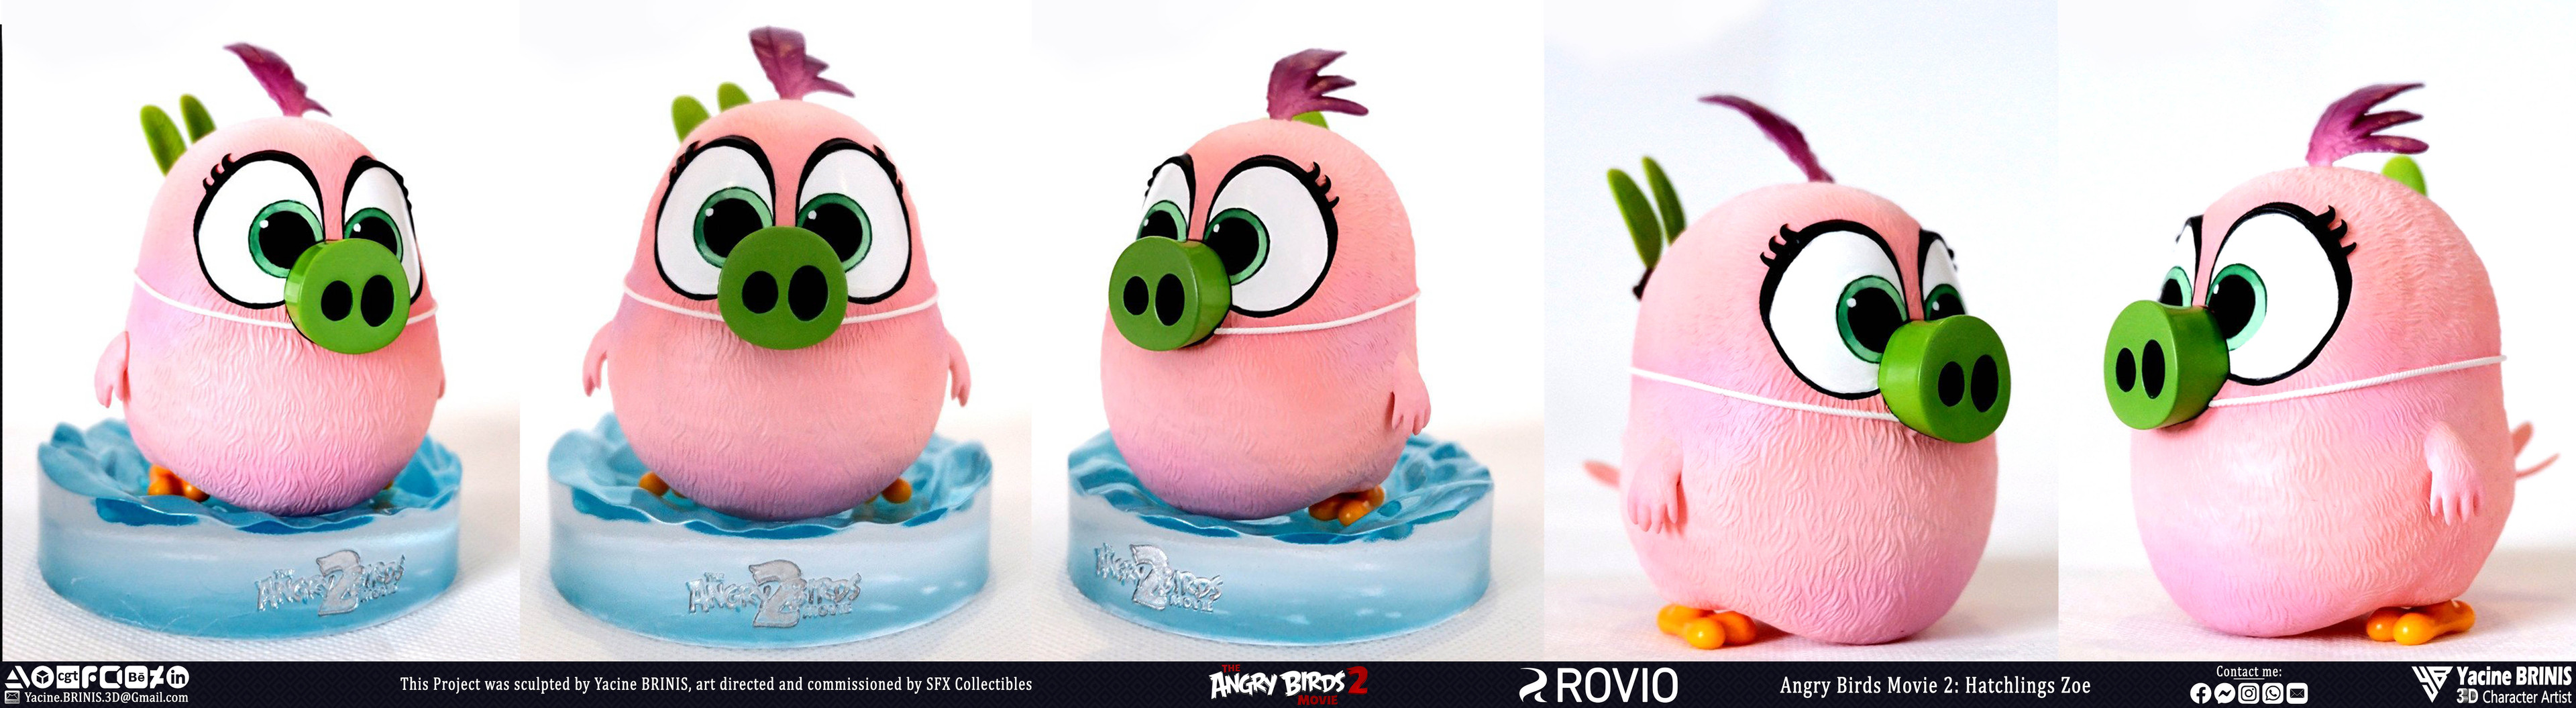 Angry Birds Movie 2 Rovio Entertainment Sculpted by Yacine BRINIS 047 Hatchlings Zoe Printed by SFX Collectibles